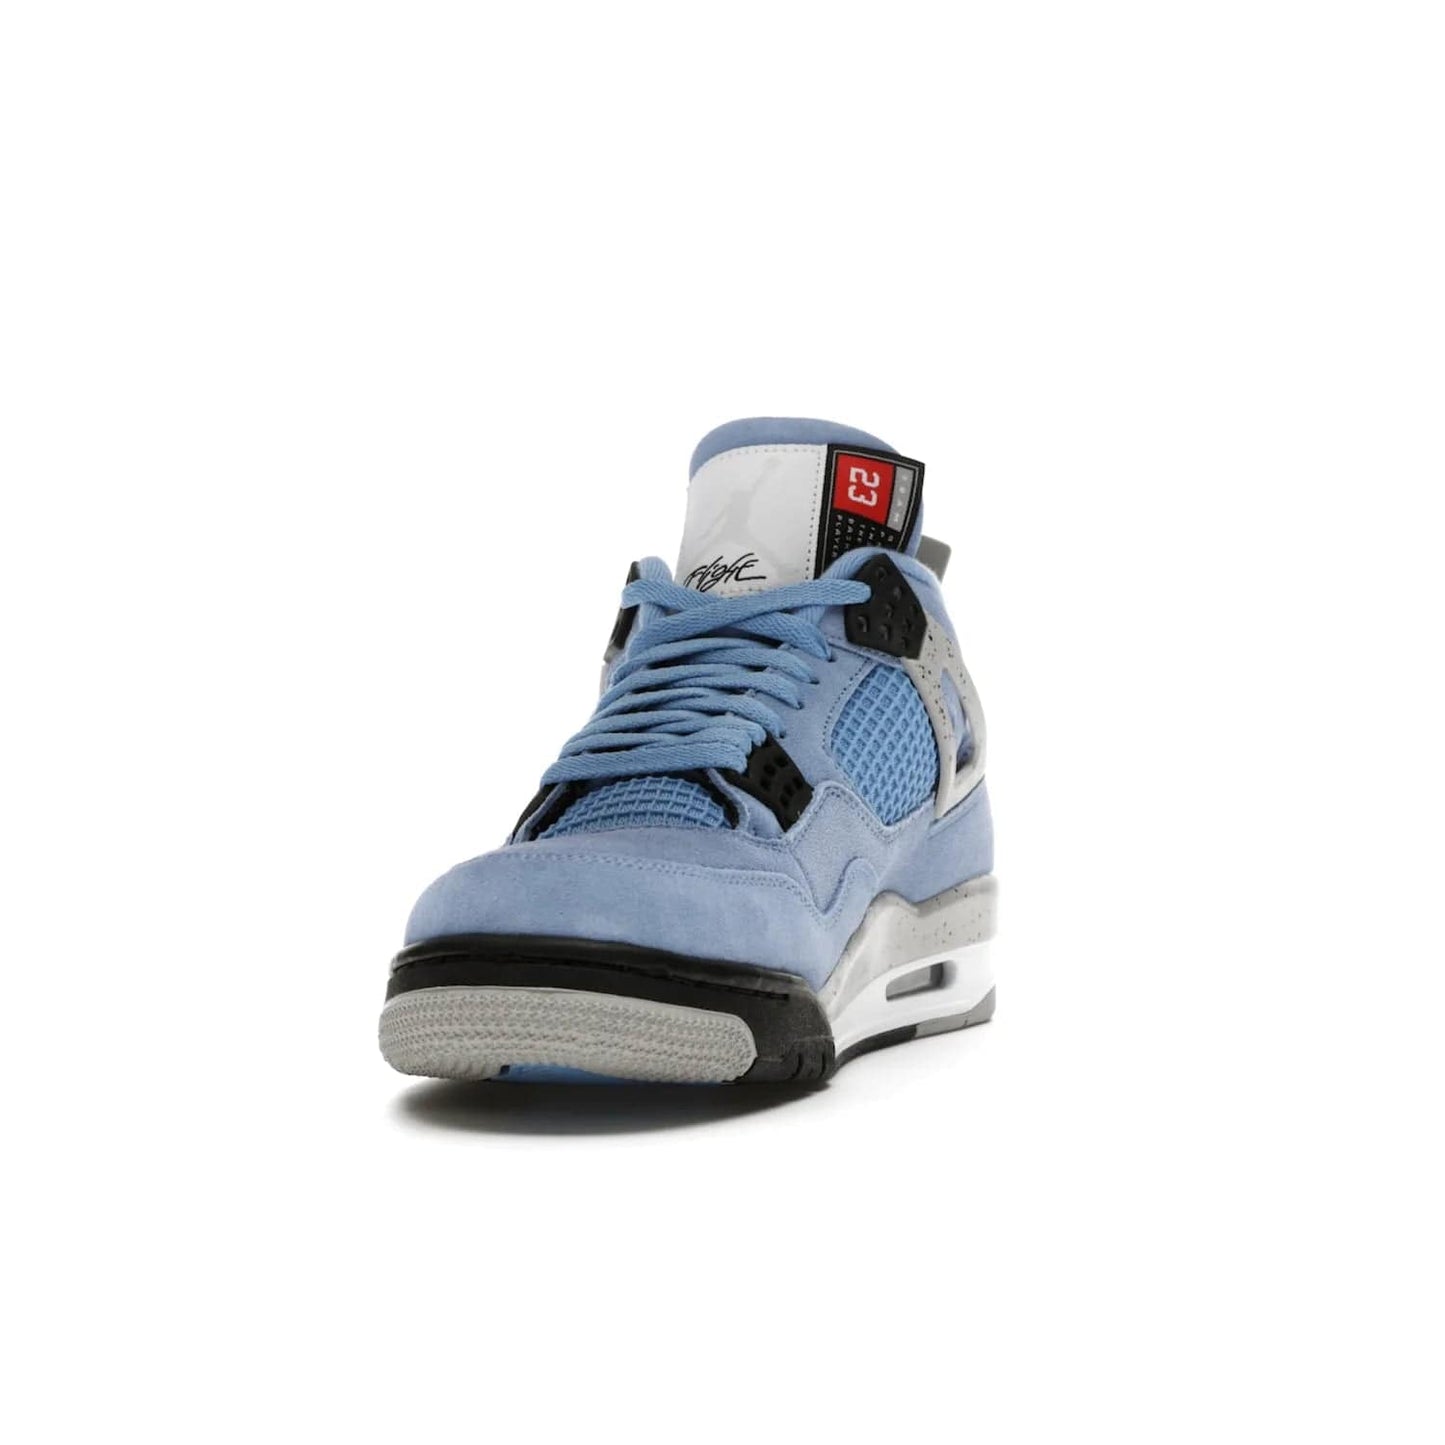 Jordan 4 Retro University Blue - Image 12 - Only at www.BallersClubKickz.com - The Air Jordan 4 University Blue honors MJ's alma mater. Rich University Blue suede, panels of netting, and Cement Grey speckled eyelets give this design an edgy look. Features a black, white and Tech Grey sole with a clear Air unit and two woven labels on the tongue. Jumpman logo & Team Jordan jock tag included. Released April 2021.